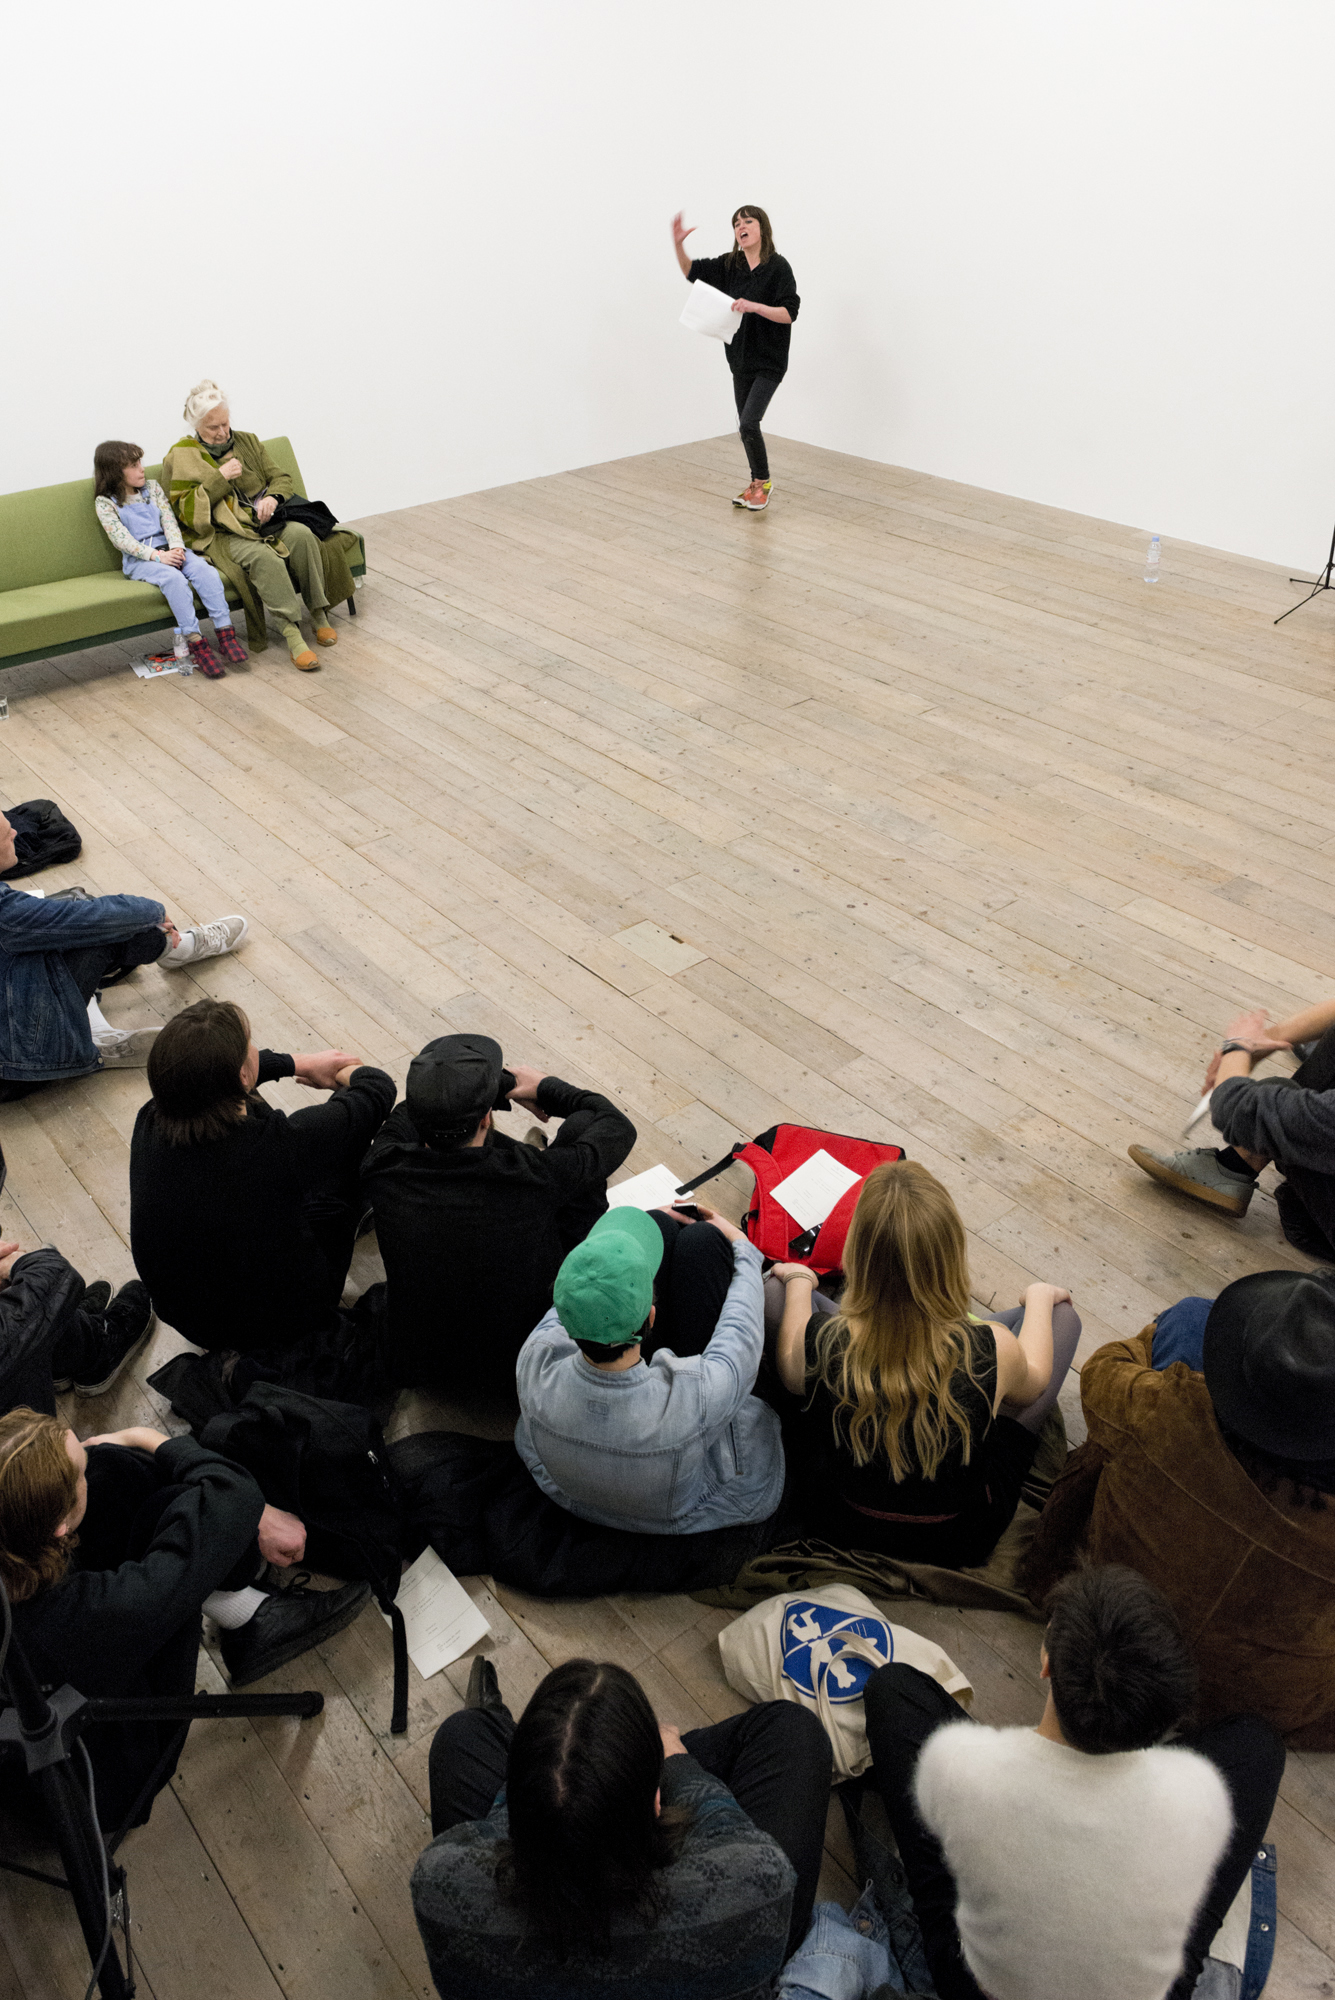 John Latham, 'Lectures', performed by Sue Tompkins (JOHN LATHAM'S LECTURES AT RAVEN ROW 10)